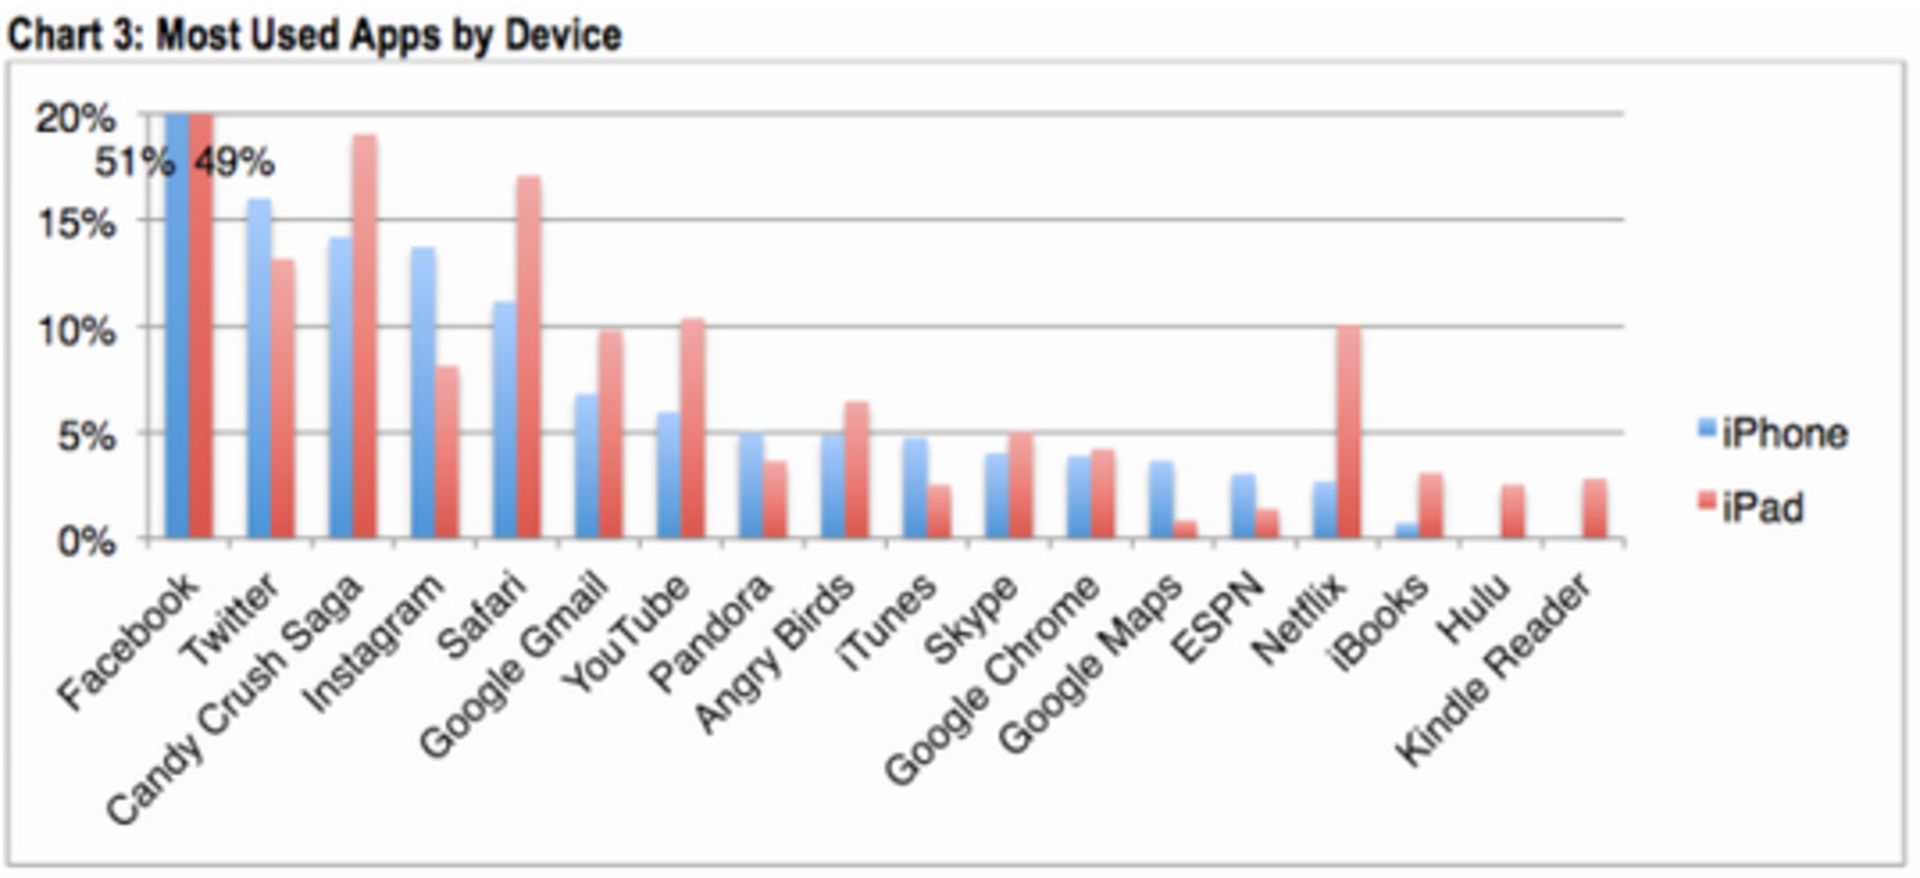 Netflix-is-used-much-more-by-iPad-owners-than-iPhone-users